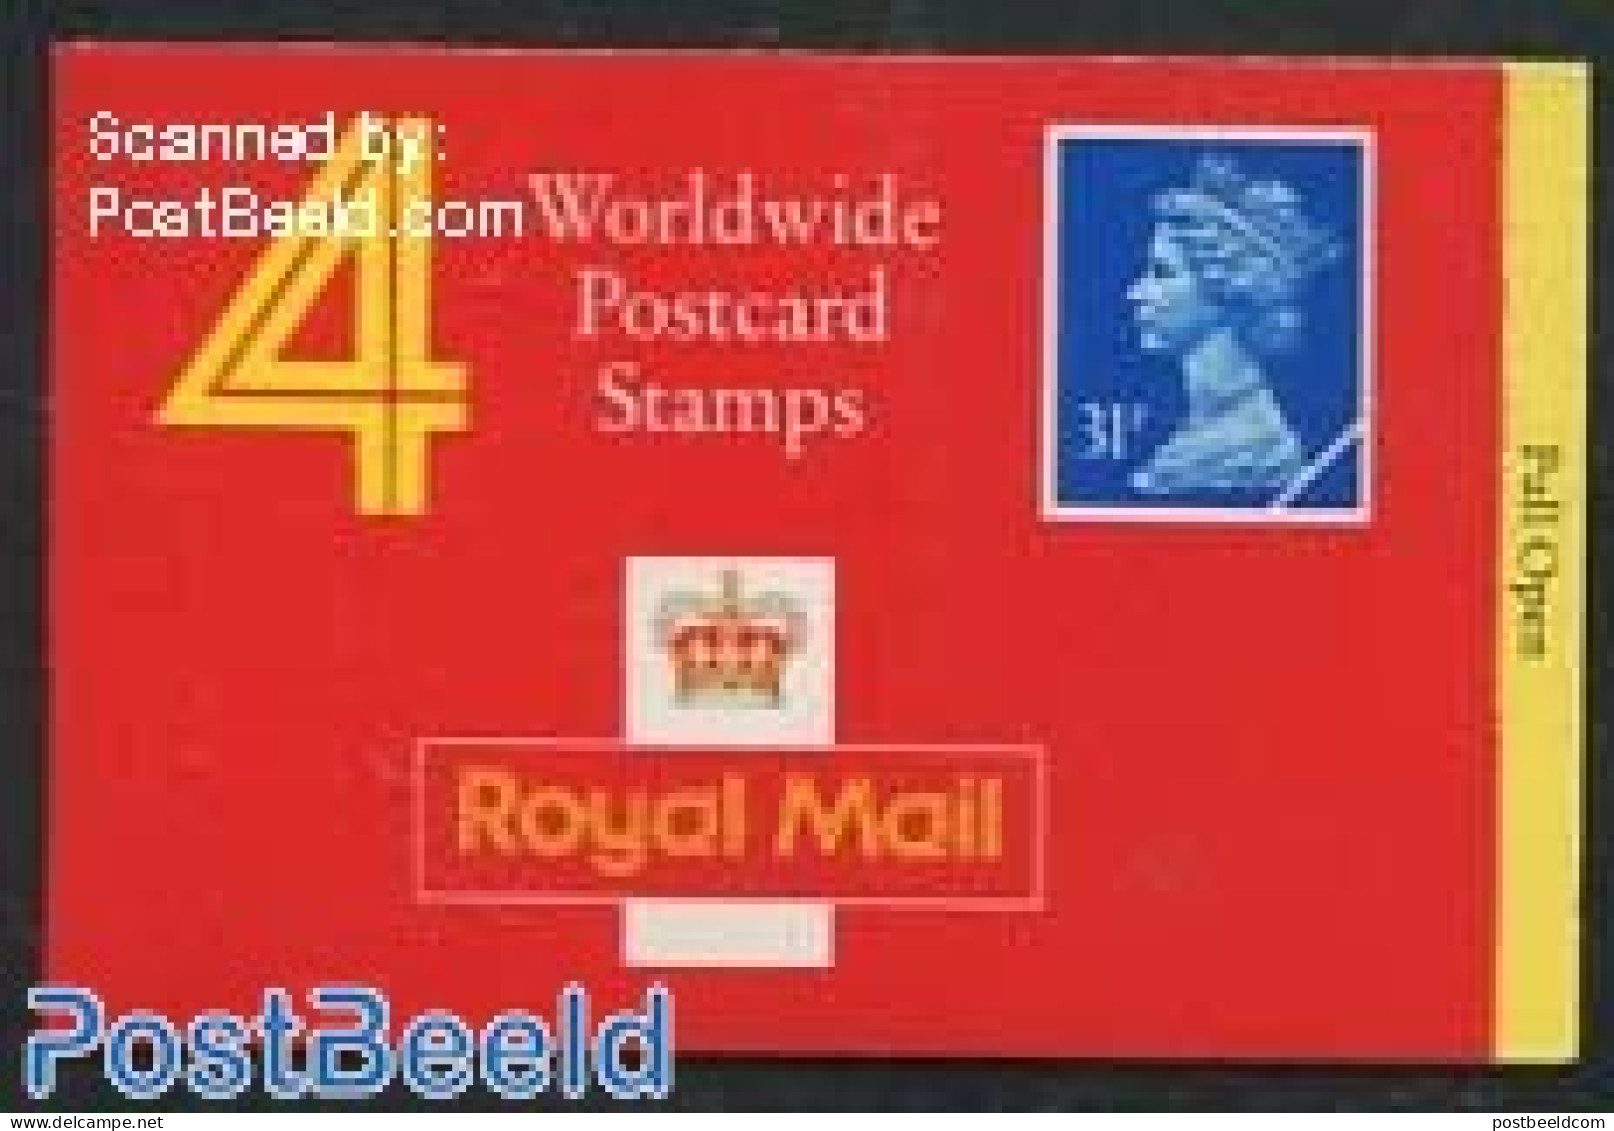 Great Britain 1990 Definitives Booklet, 4x31p, Mint NH, Stamp Booklets - Neufs